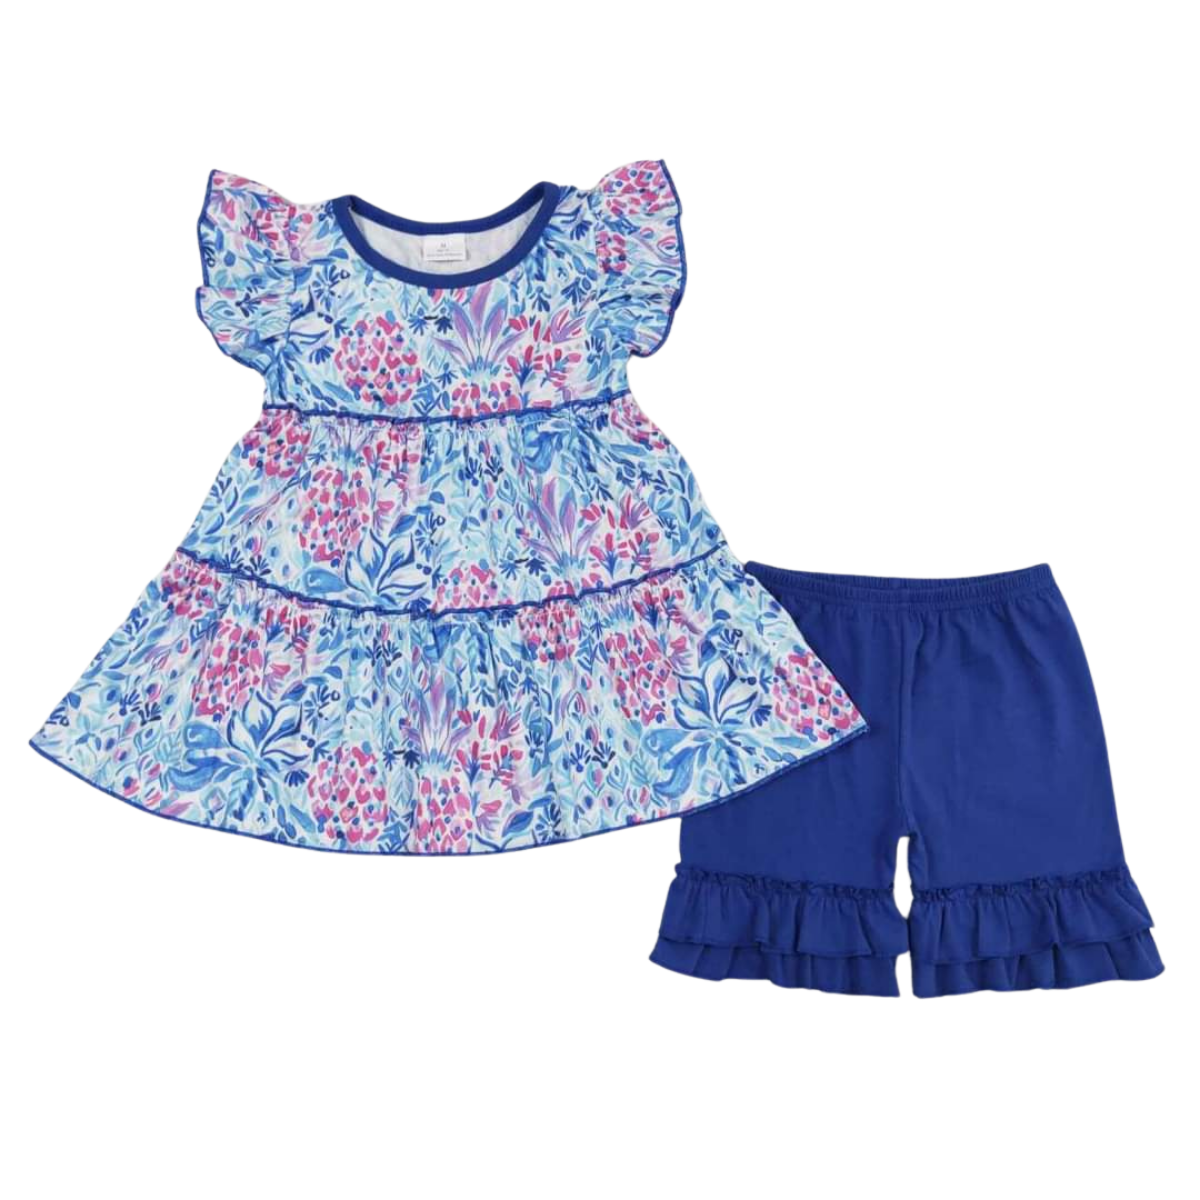 Girls Summer Shorts Outfit - Navy Watercolor Floral Ruffle